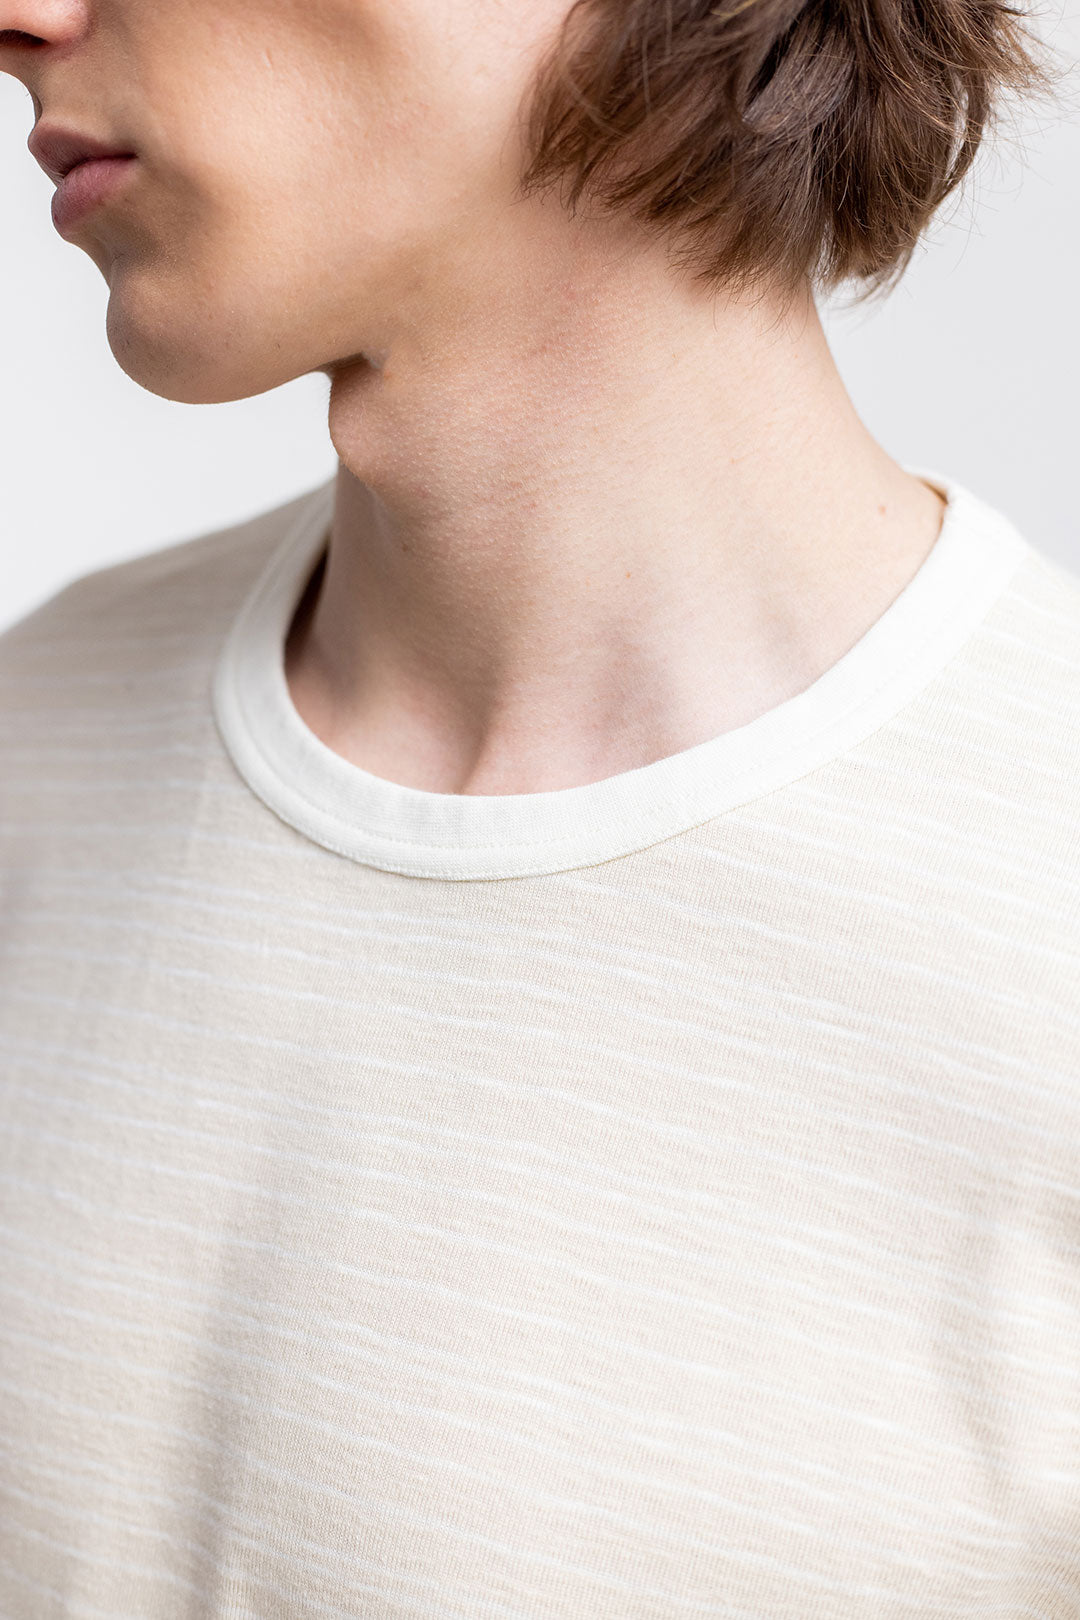 Beige, striped T-shirt made of organic cotton from Rotholz